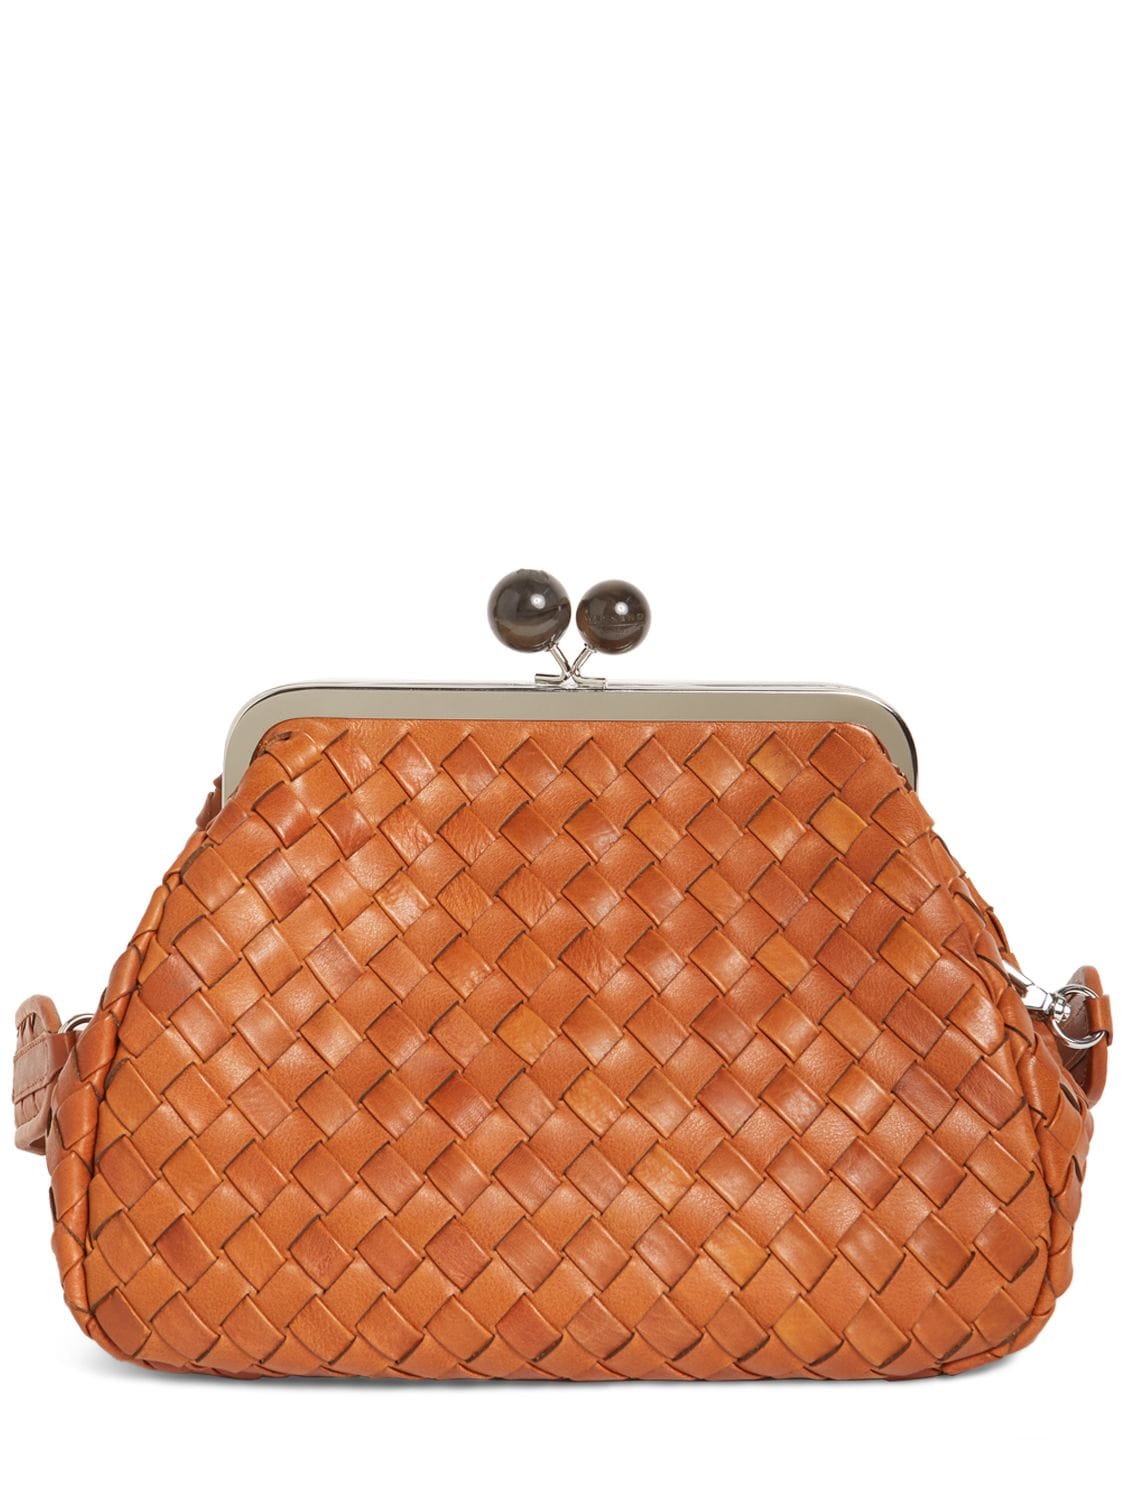 Image of Pancia Woven Leather Clutch